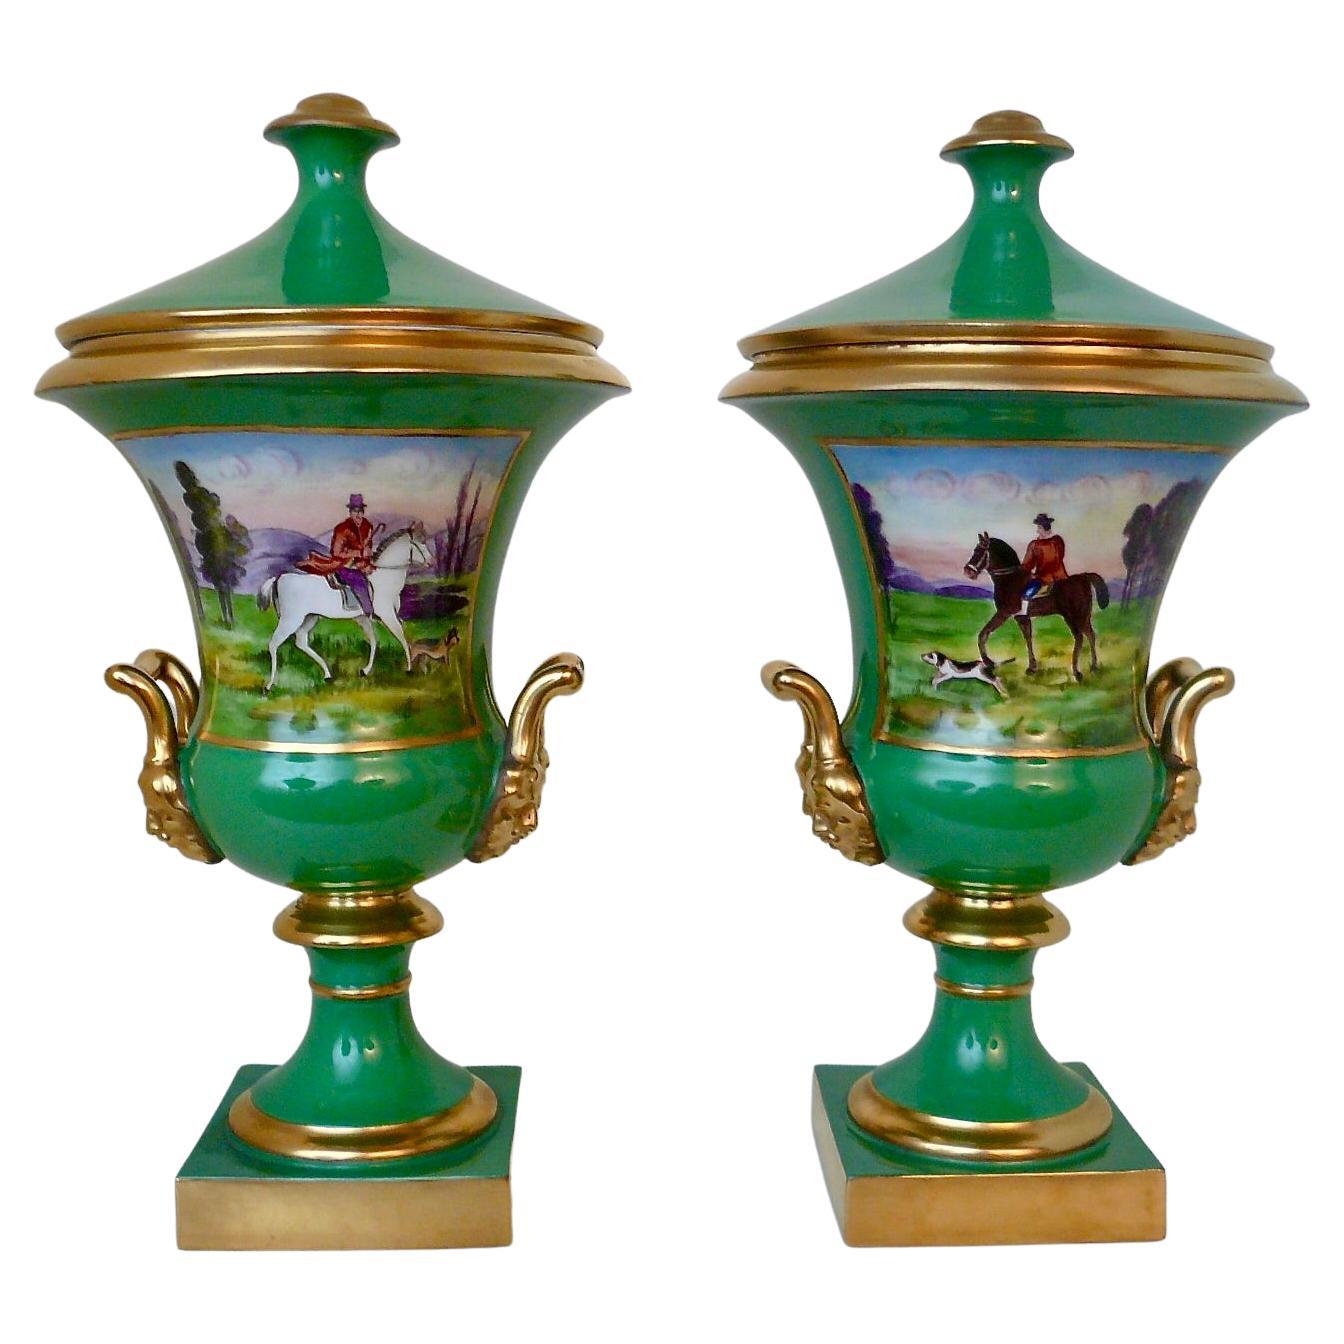 Pair Continental Green Porcelain Campana urns with Hunting Scenes and Flowers